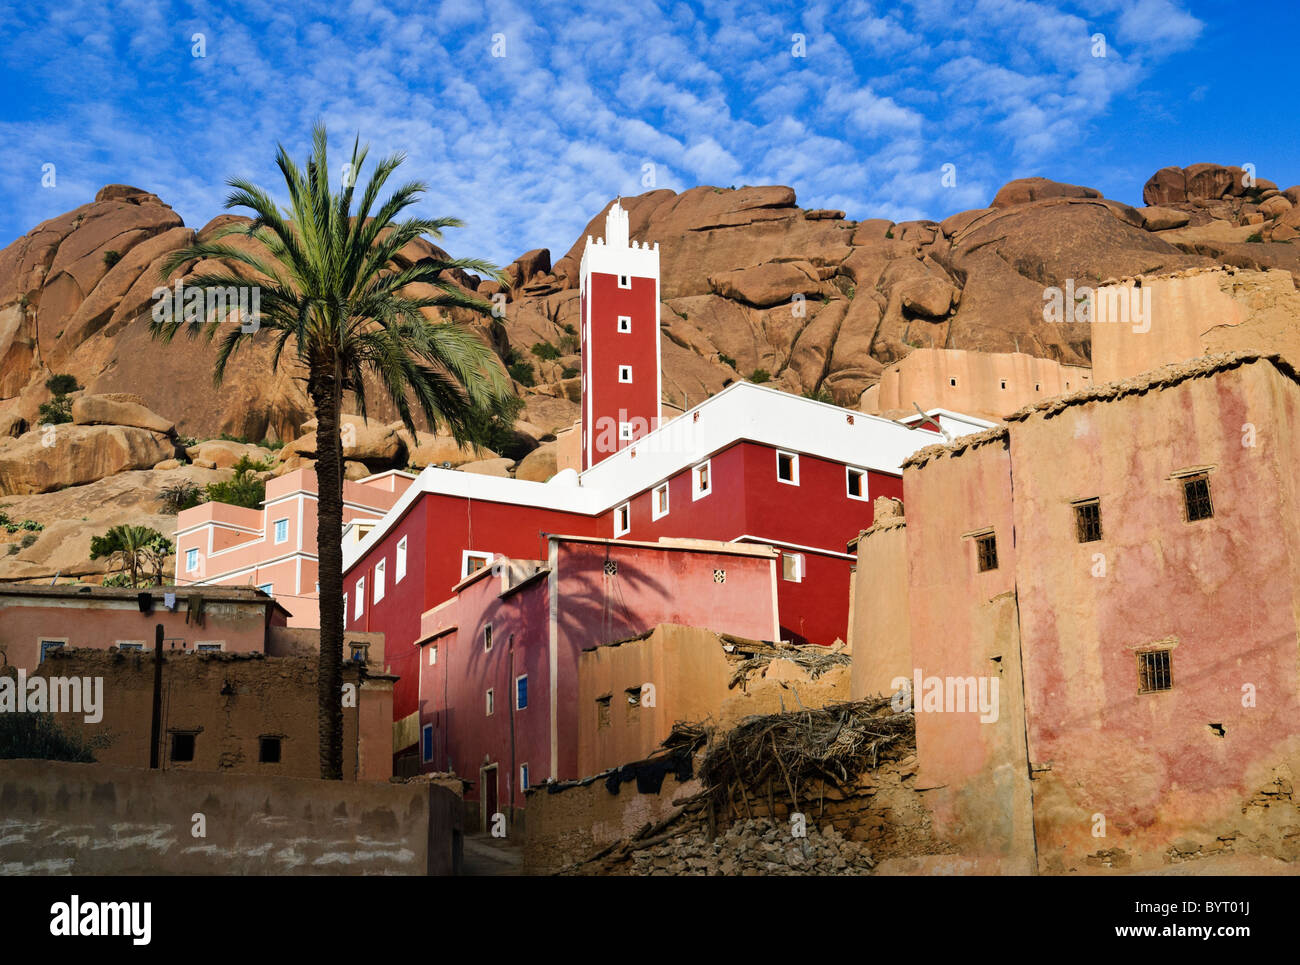 Red painted mosque in the village of Adai, near Tafraoute, Morocco Stock Photo